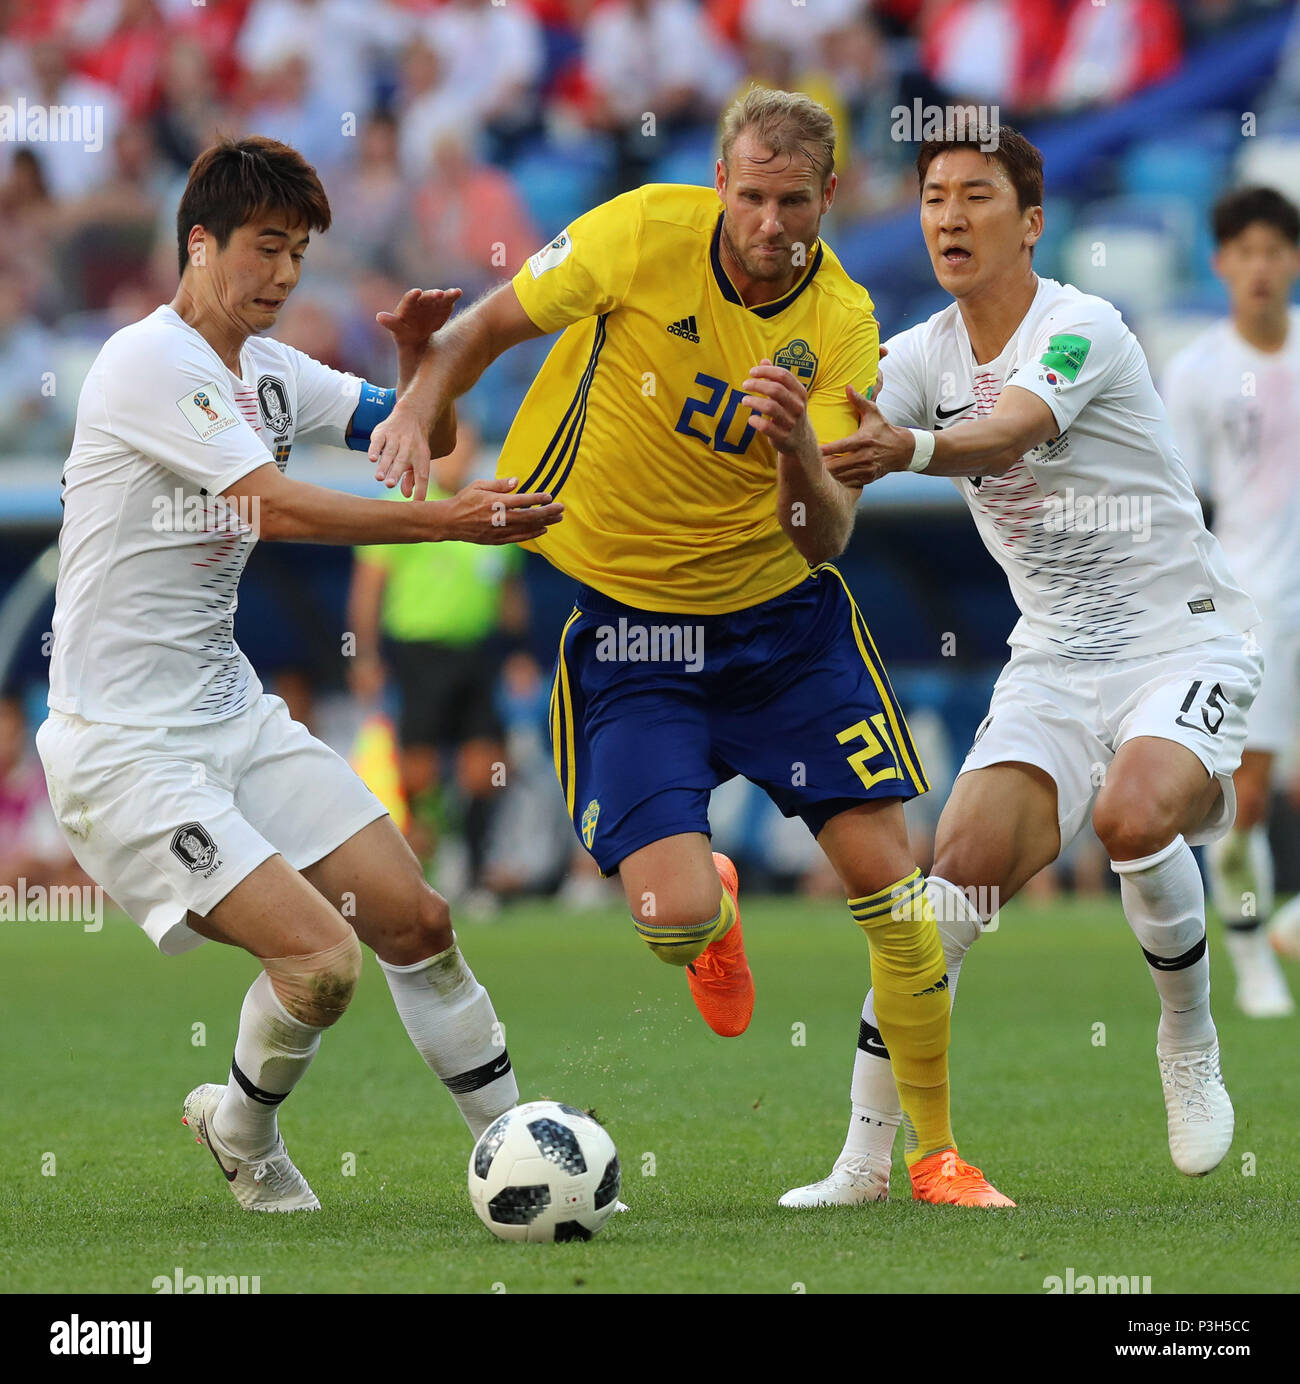 Nizhny Novgorod, Russia. 18th June, 2018. Ola Toivonen (C) of Sweden vies with Ki Sungyueng (L) and Jung Wooyoung of South Korea during a group F match between Sweden and South Korea at the 2018 FIFA World Cup in Nizhny Novgorod, Russia, June 18, 2018. Credit: Yang Lei/Xinhua/Alamy Live News Stock Photo